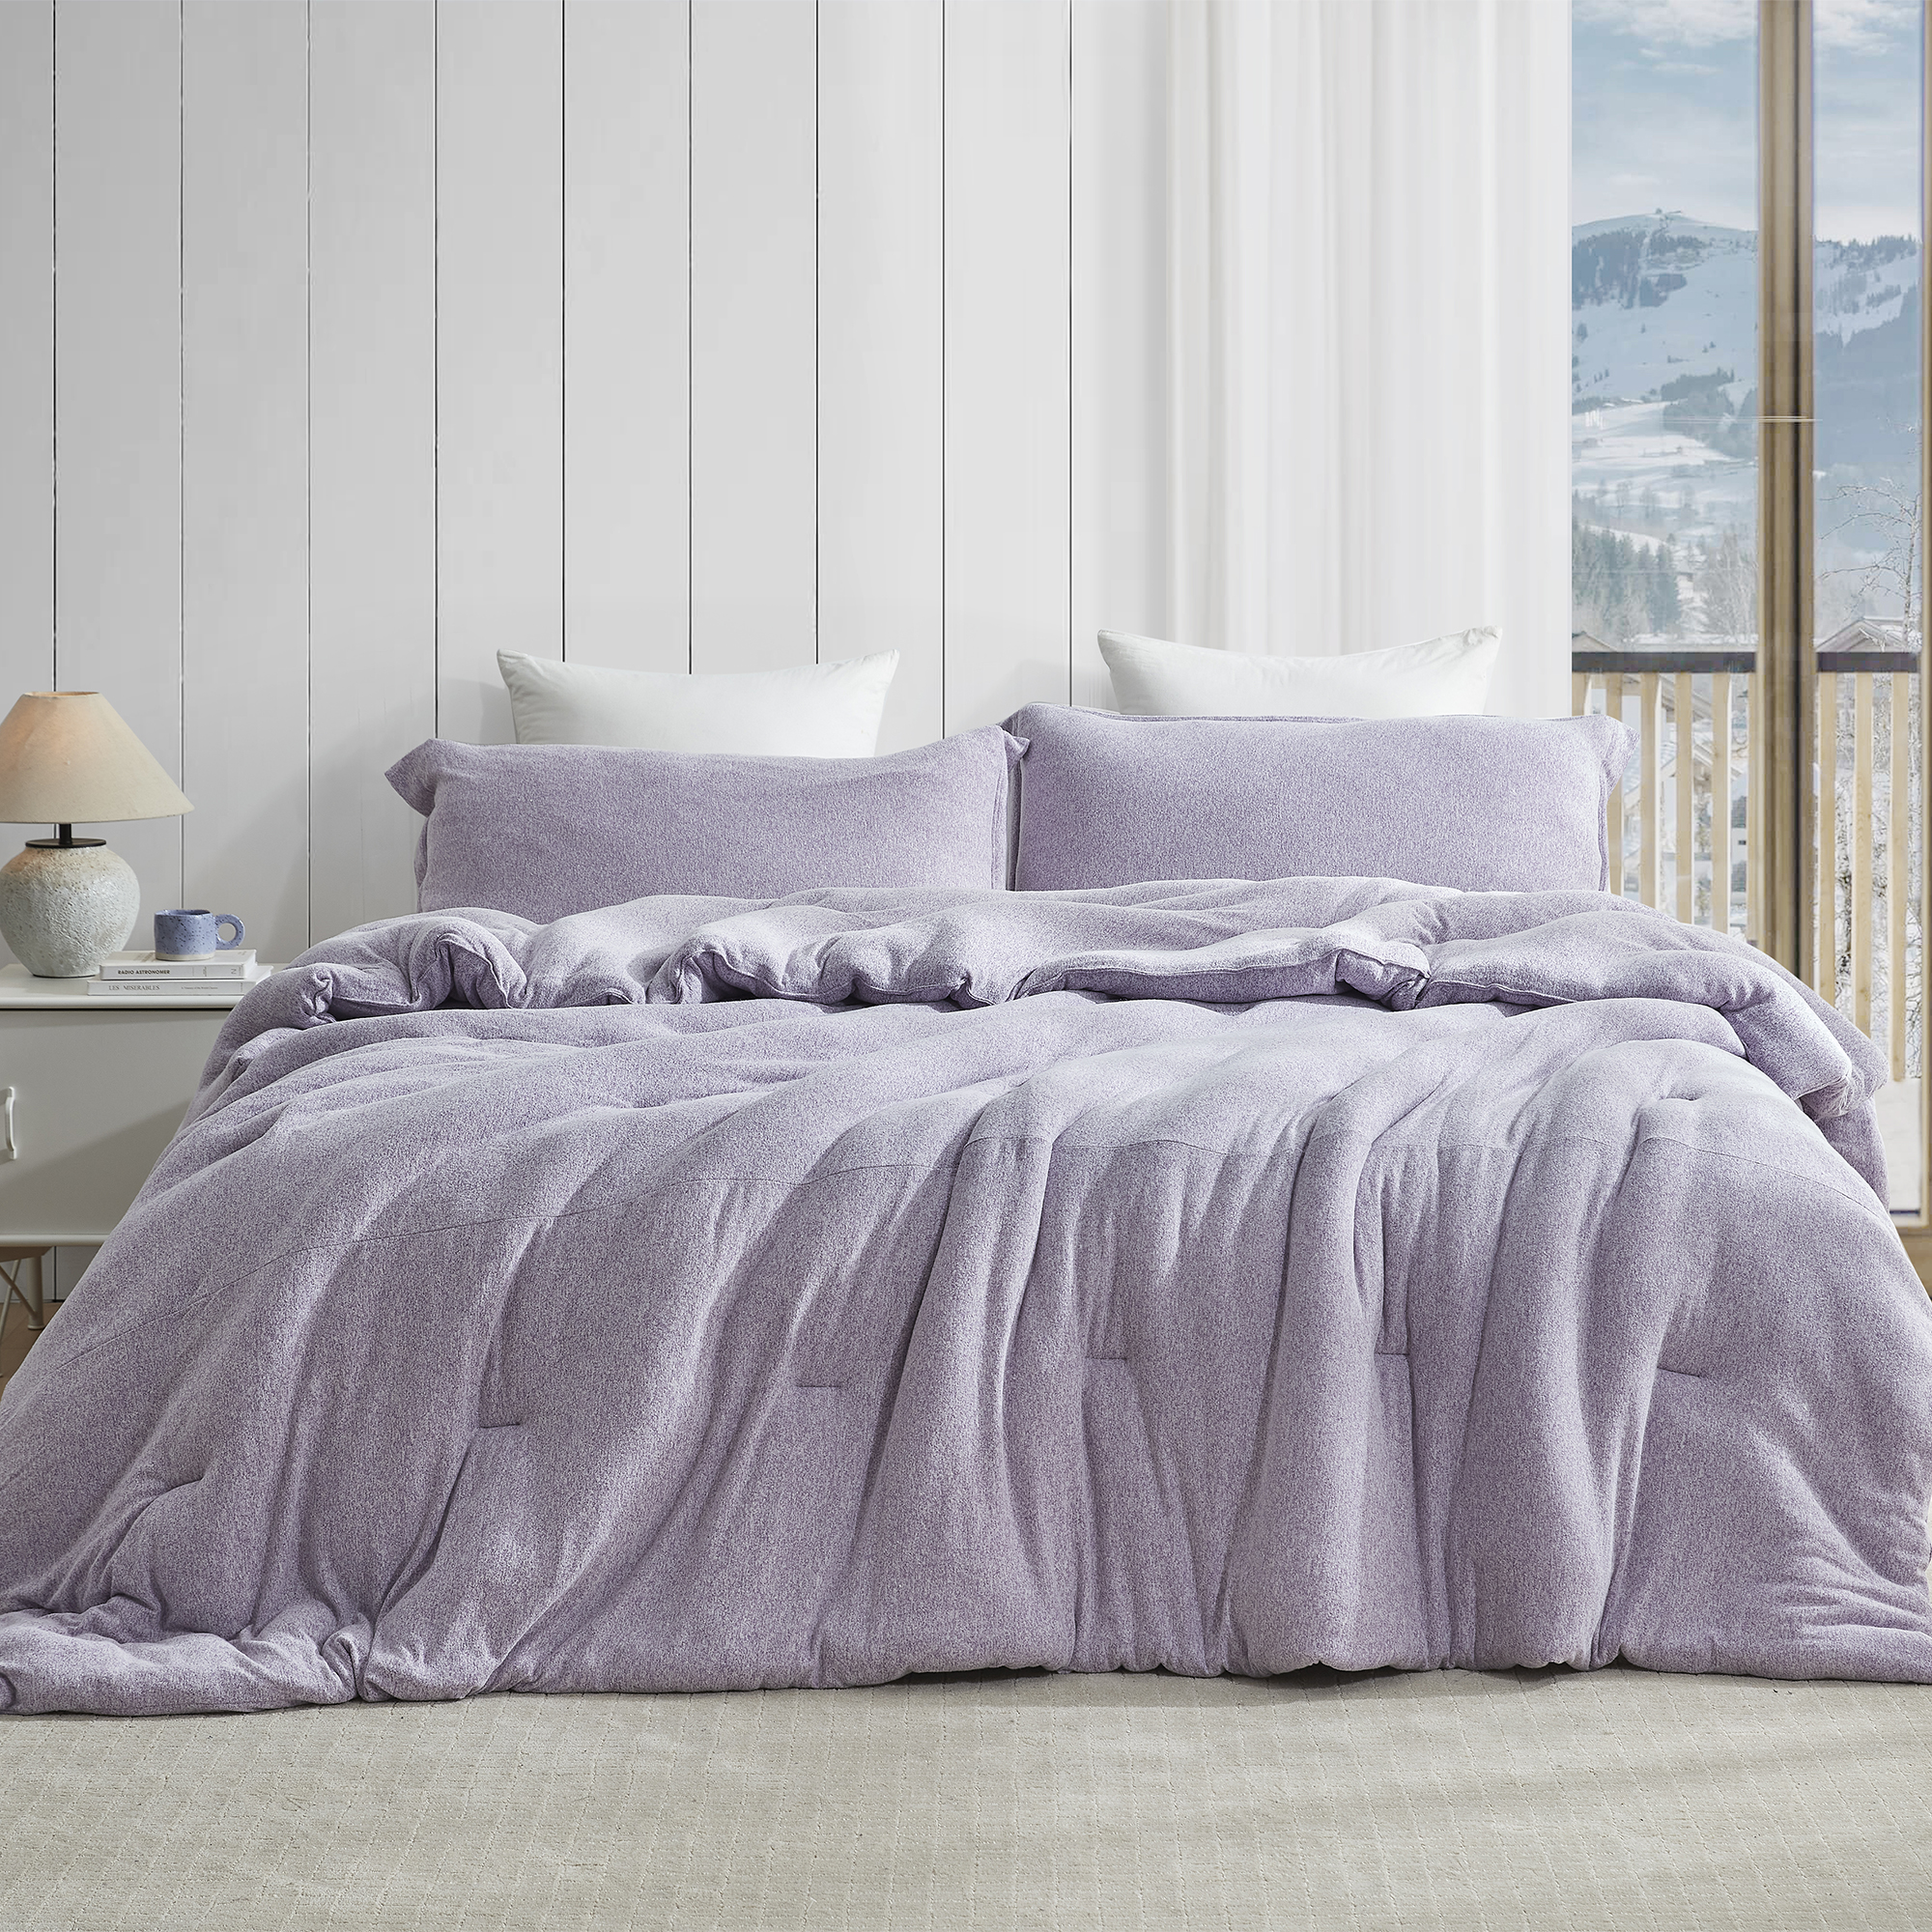 Sweater Weather - Coma Inducer® Oversized Queen Comforter - Snowy Purple